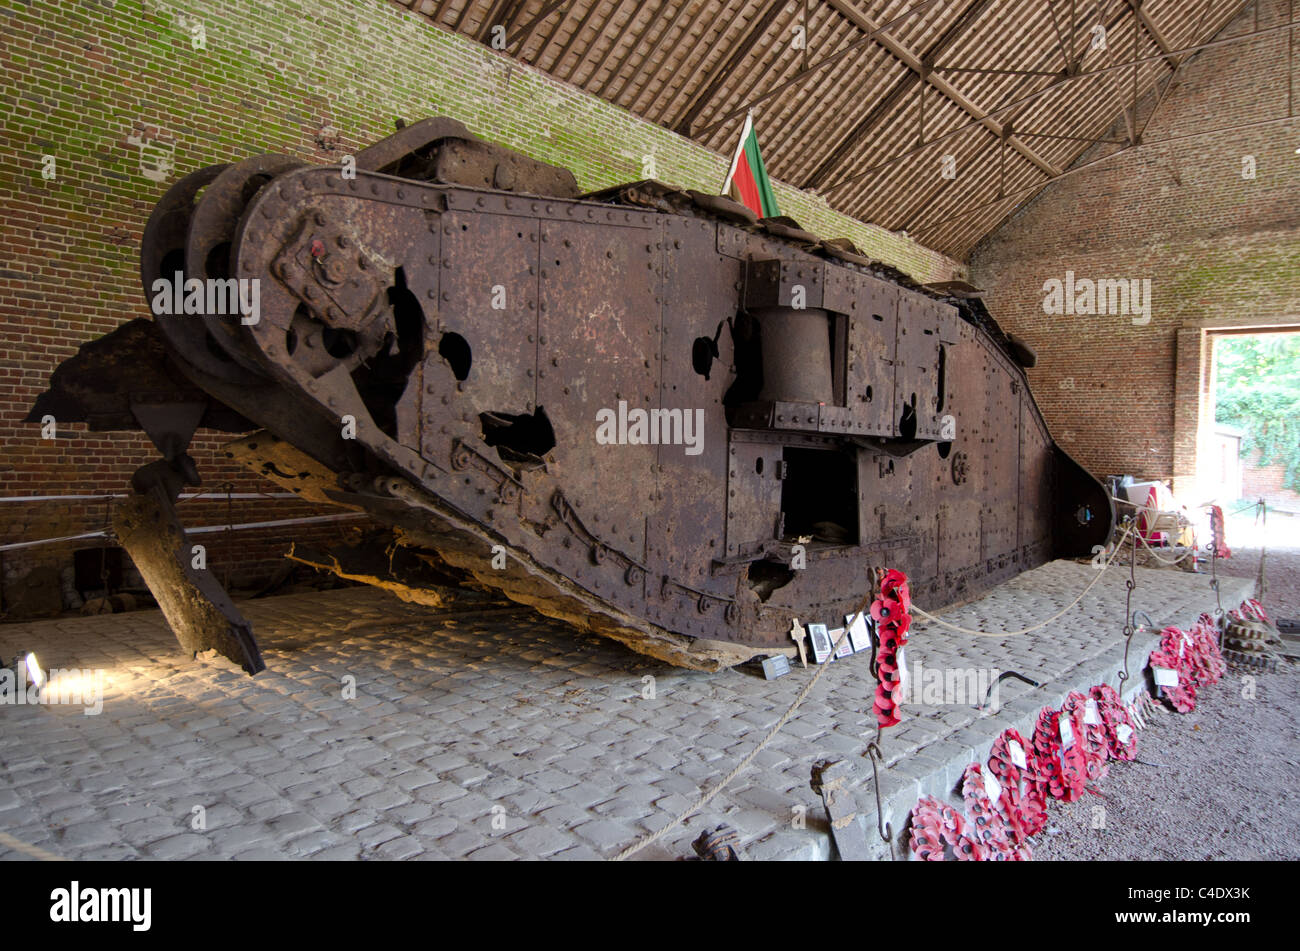 Destroyed First World War British tank on display in France Stock Photo